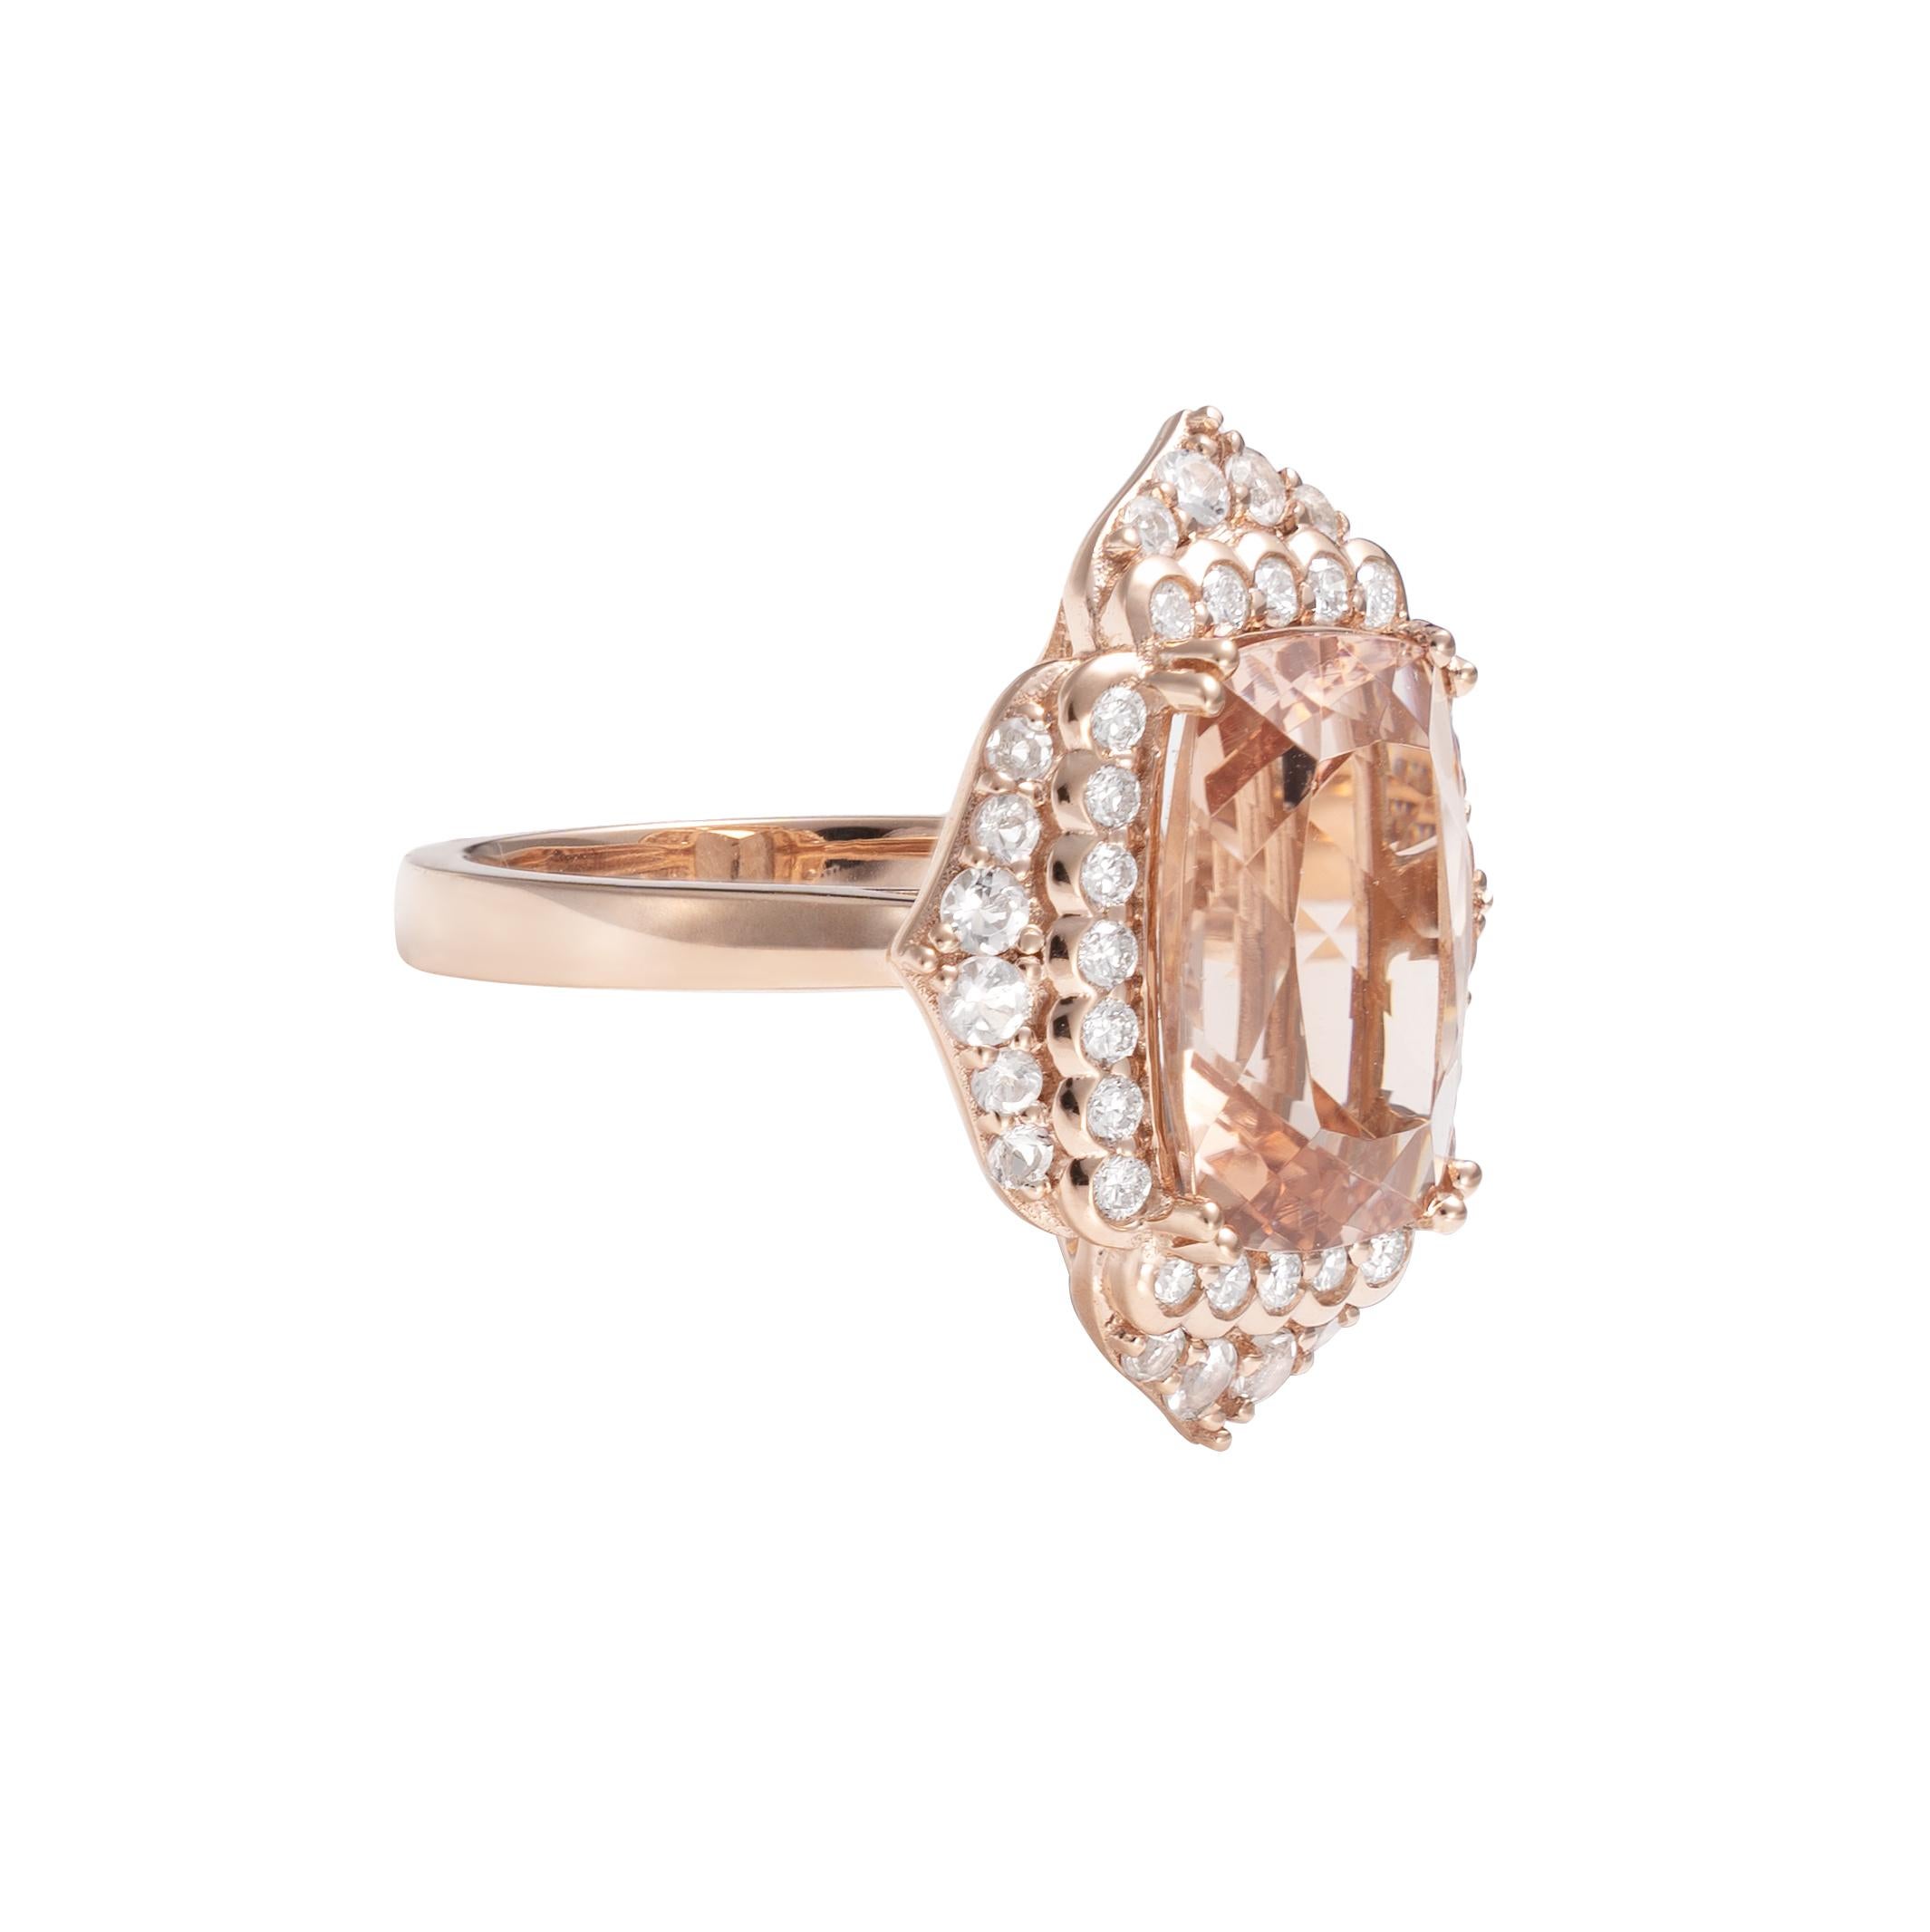 This collection features an array of magnificent morganites! Accented with White Diamond these rings are made in rose gold and present a classic yet elegant look.

Classic morganite ring in 18K Rose gold with White Diamond. 

Morganite: 5.71 carat,